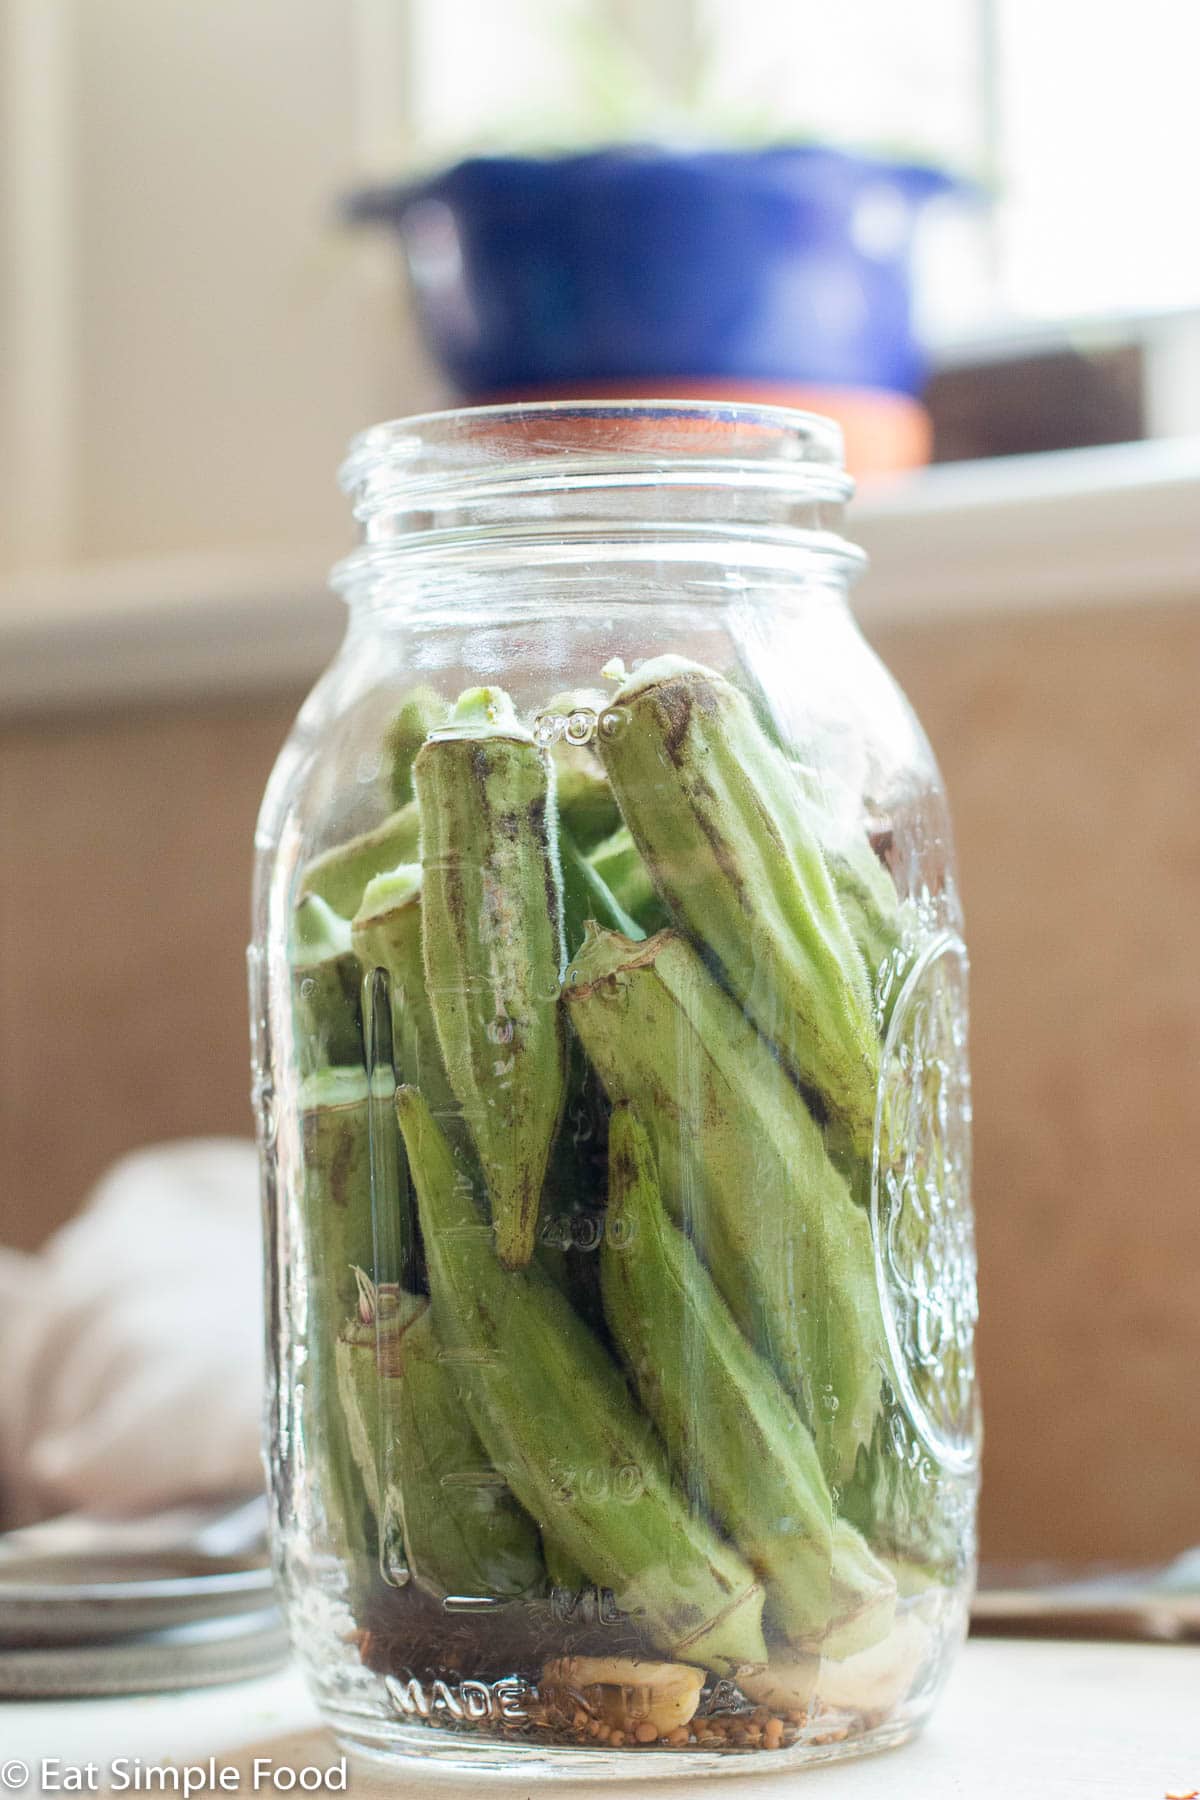 Mason quart jar filled with whole okra, garlic cloves, and spices.